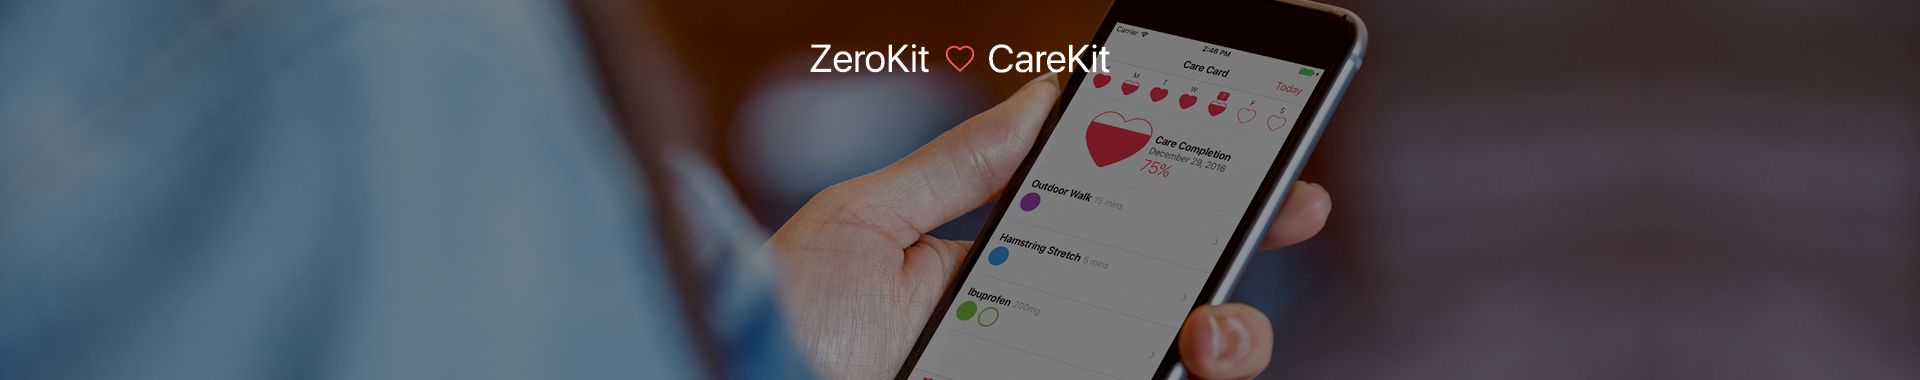 Our ZeroKit brings end-to-end encryption to digital health apps